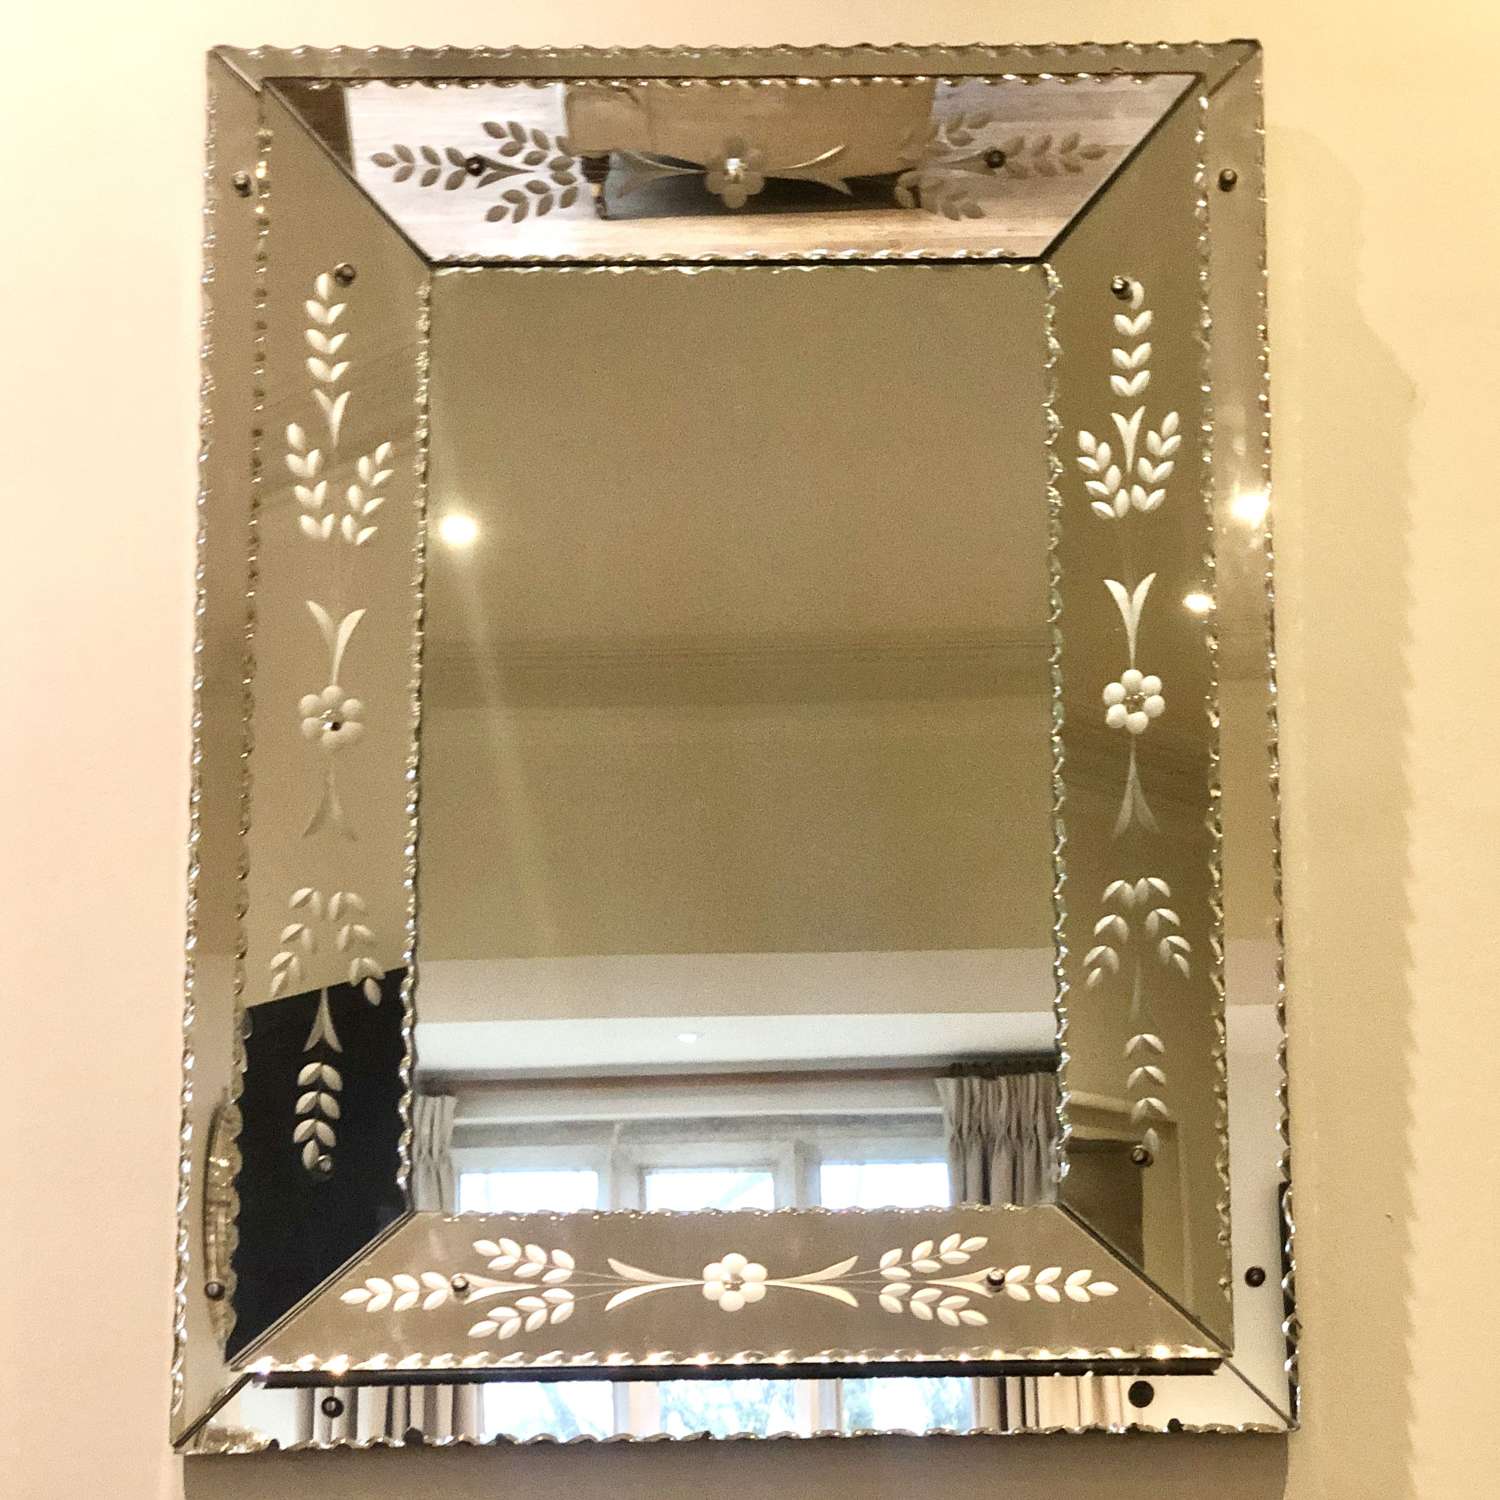 1930s Venetian etched and scalloped edged mirror